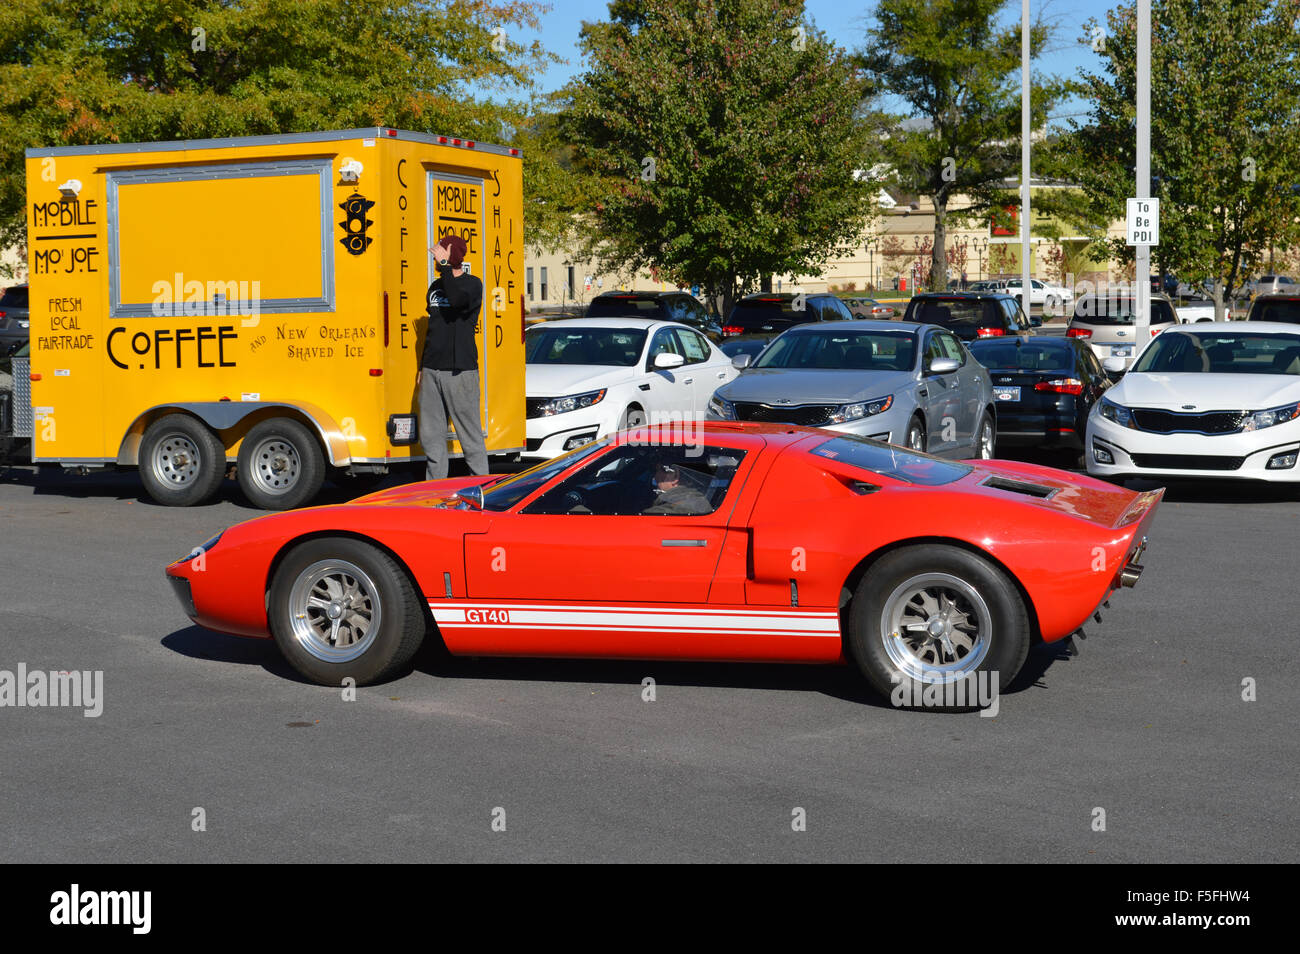 The Ford GT40 on display at a car show. Stock Photo